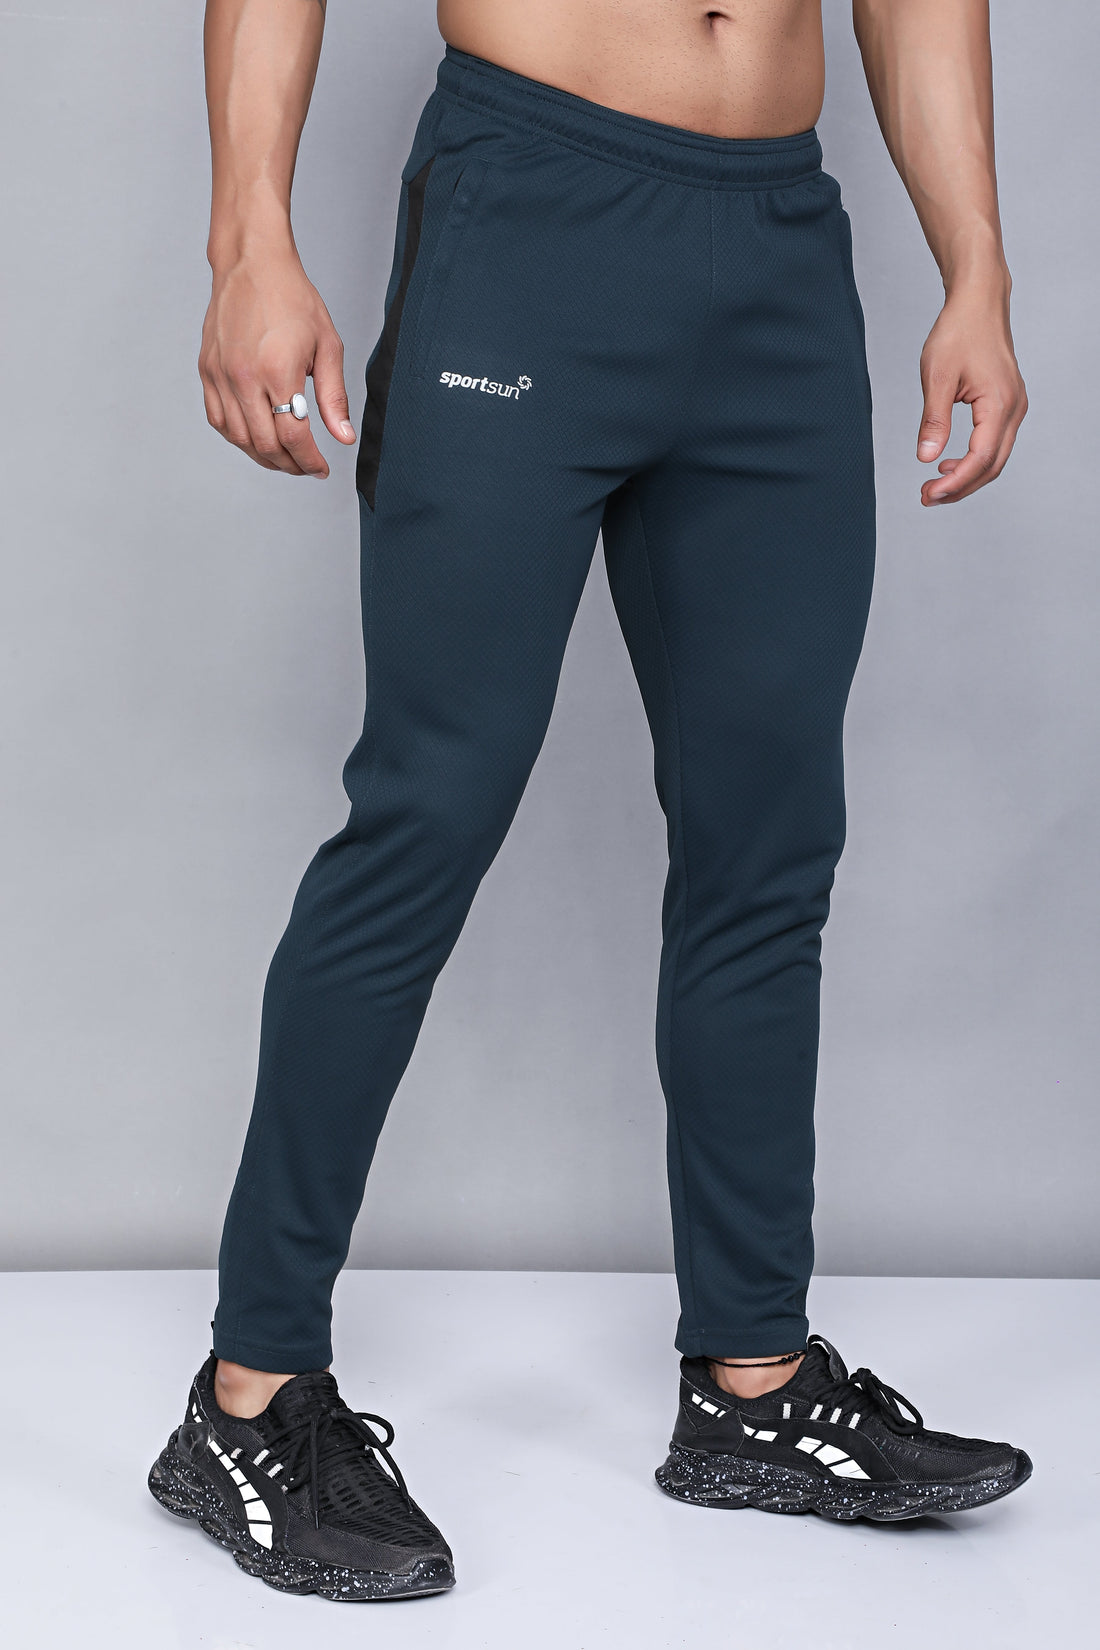 Sport Sun Air Max Airforce Track Pant for Men